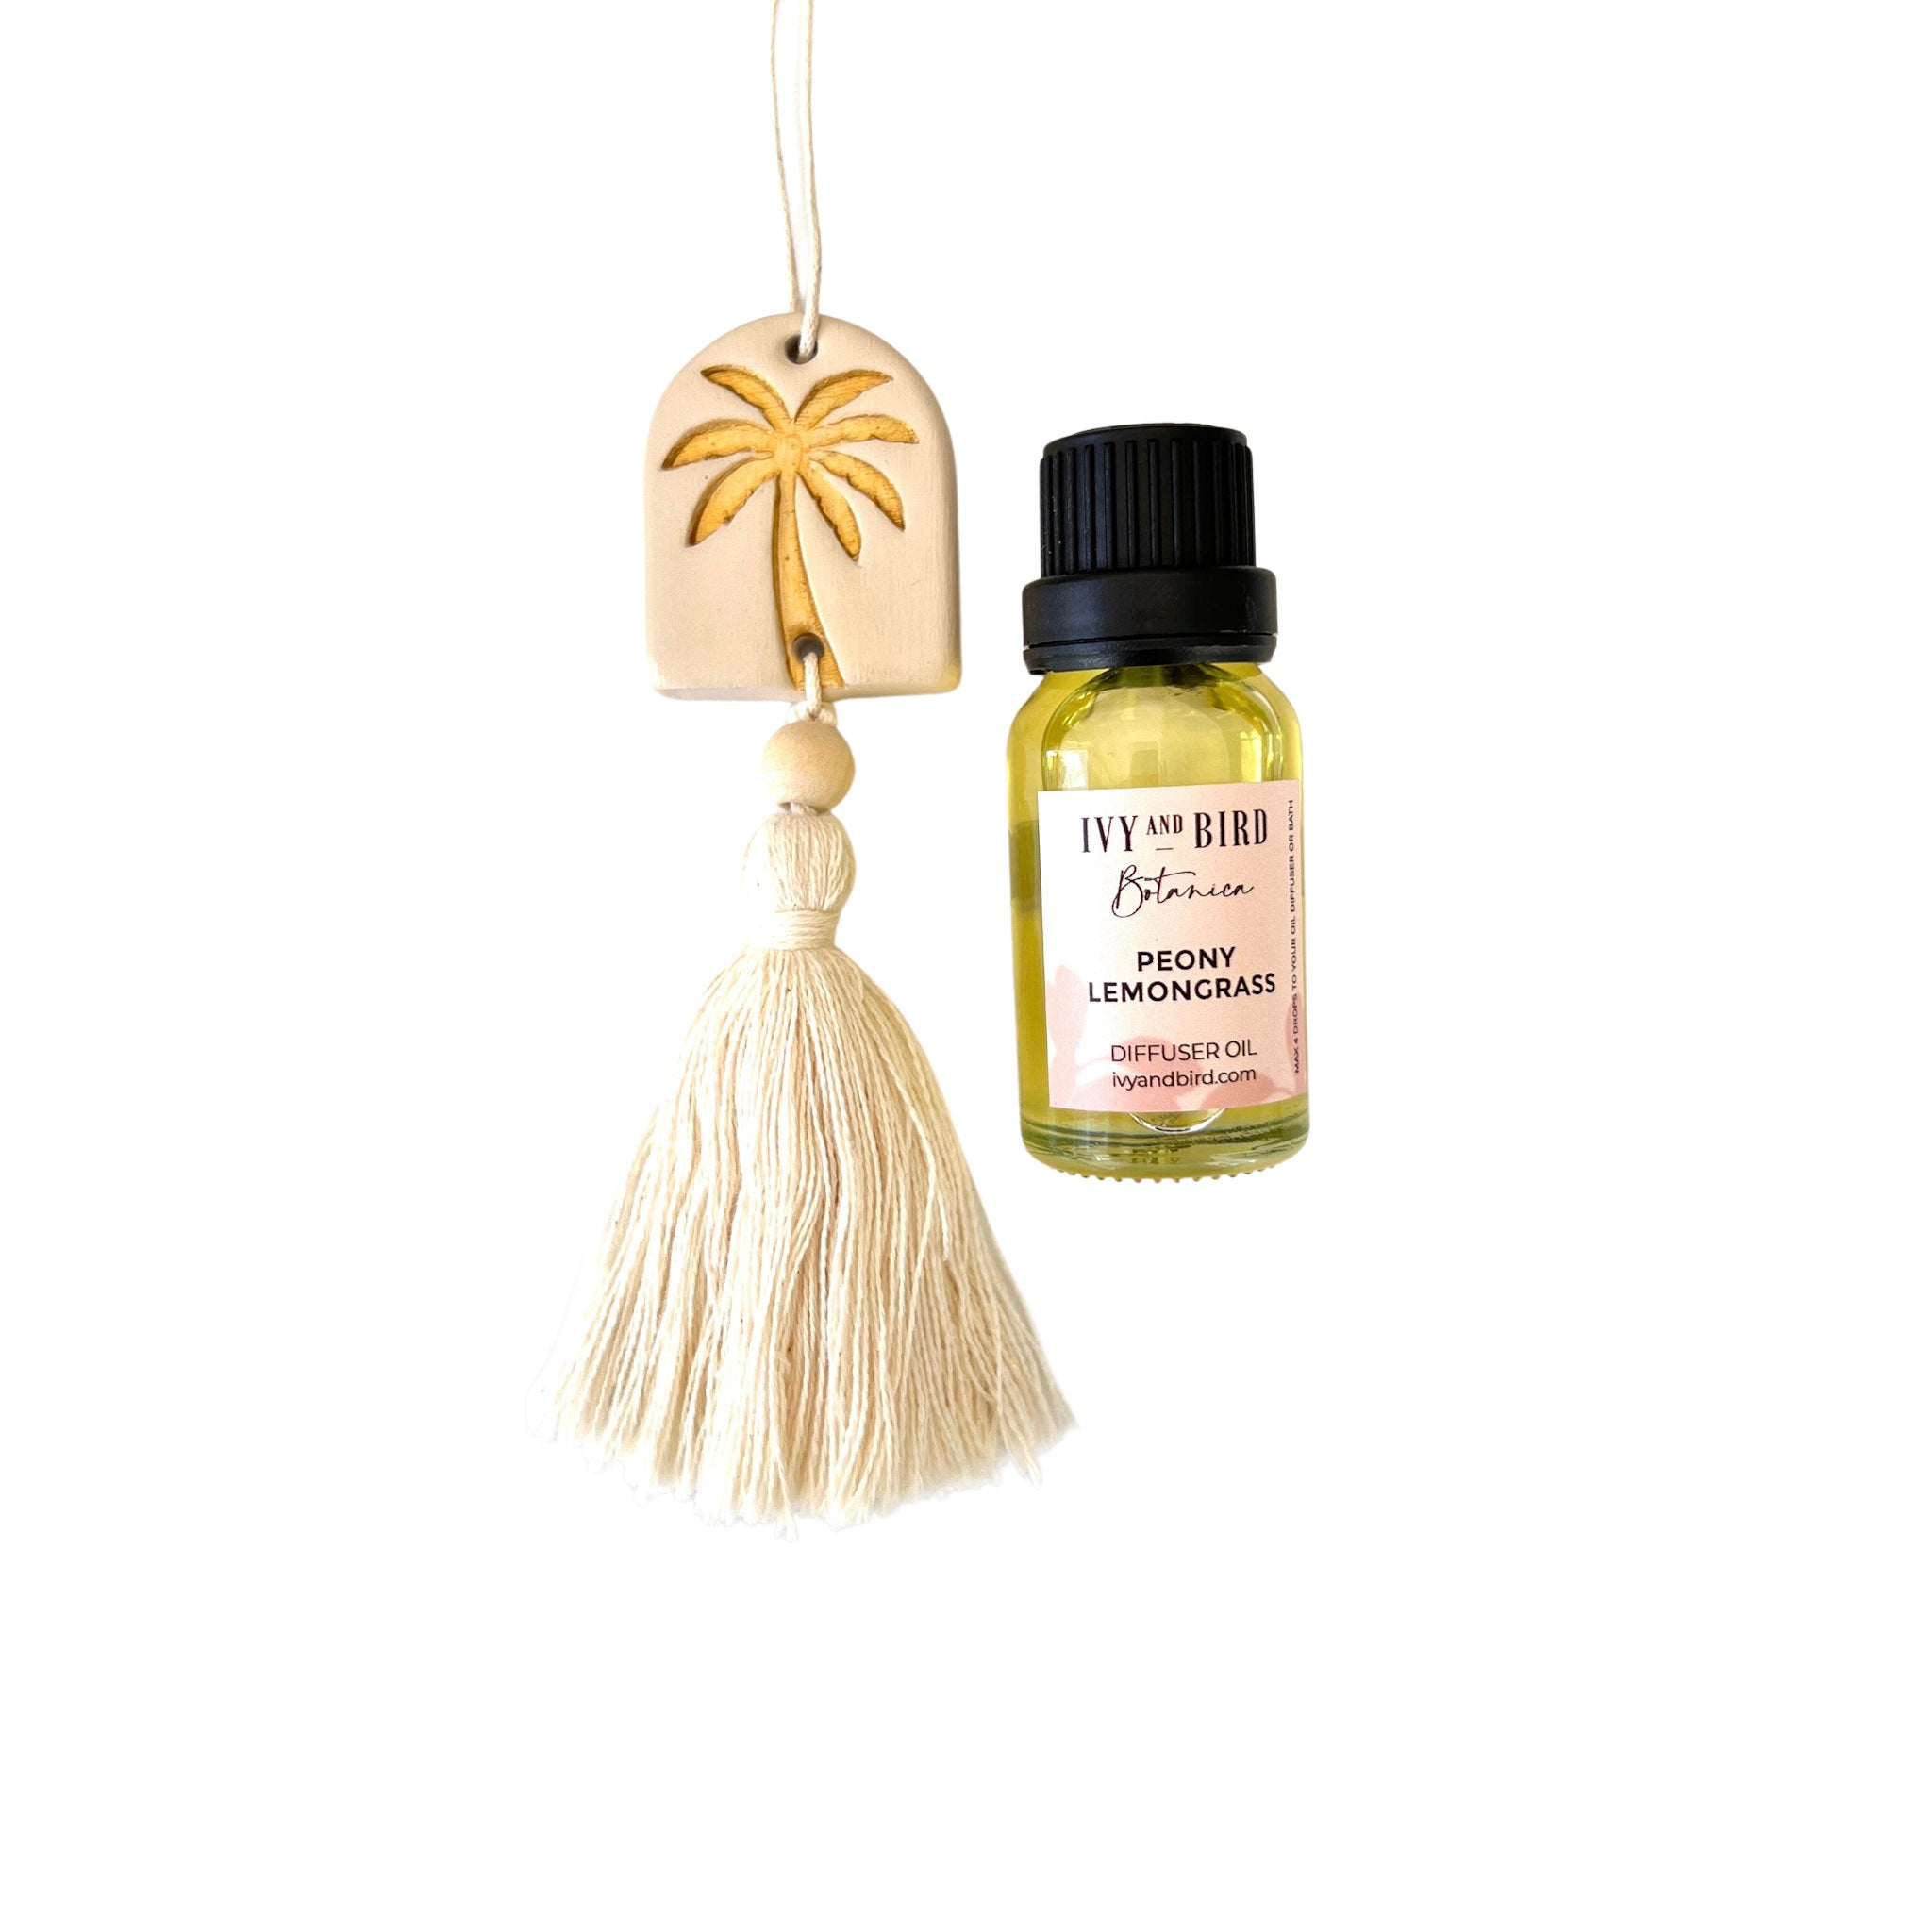 PALM CAR/ROOM DIFFUSER GIFT PACK